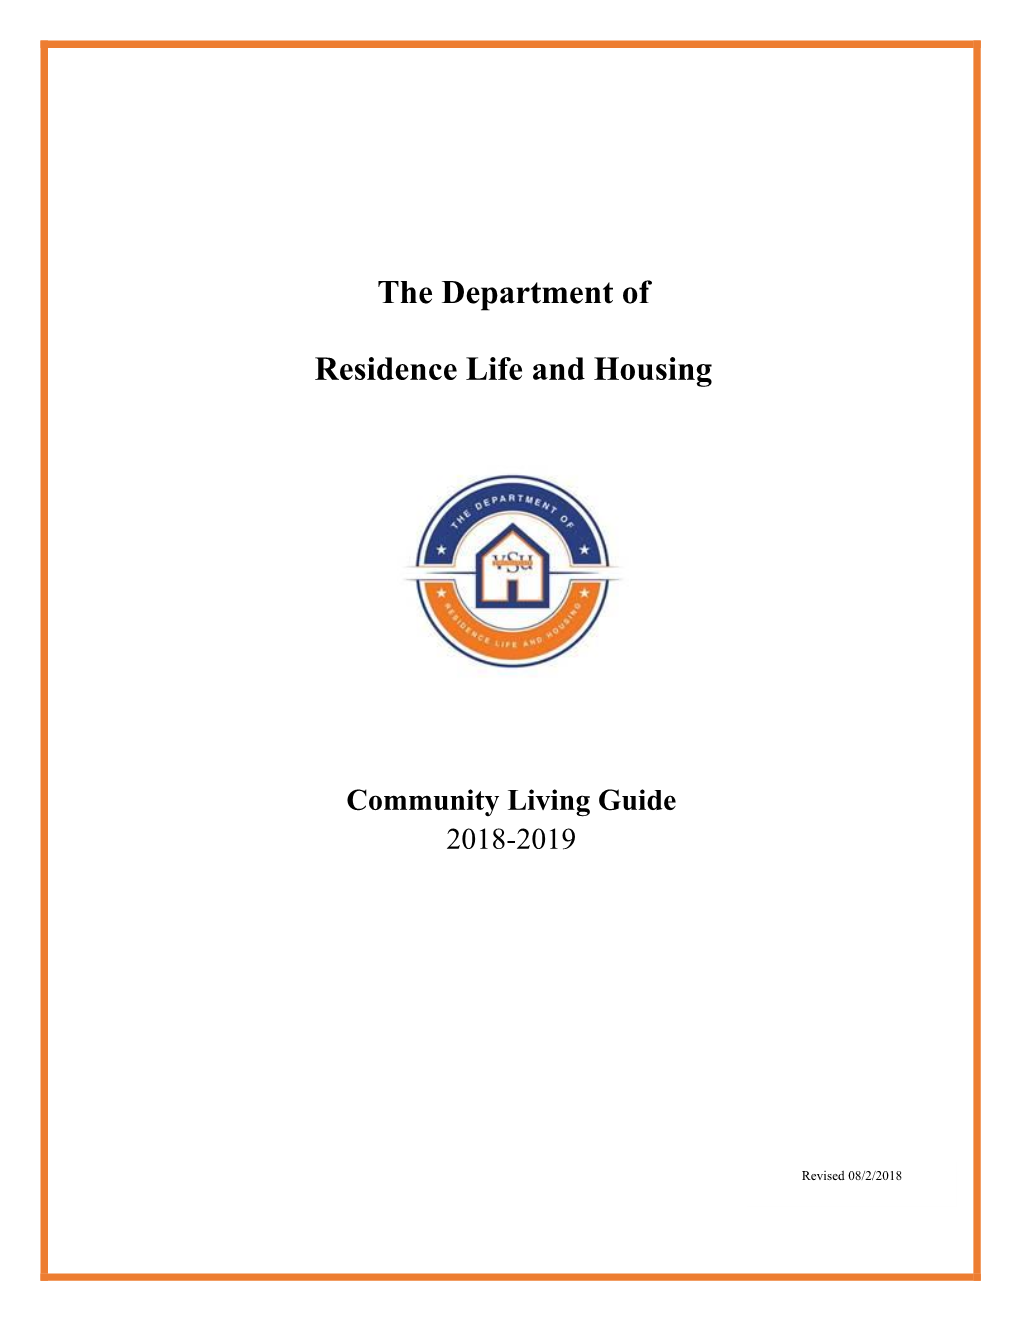 The Department of Residence Life and Housing Encourages You to Become Involved in the Opportunities Offered to You